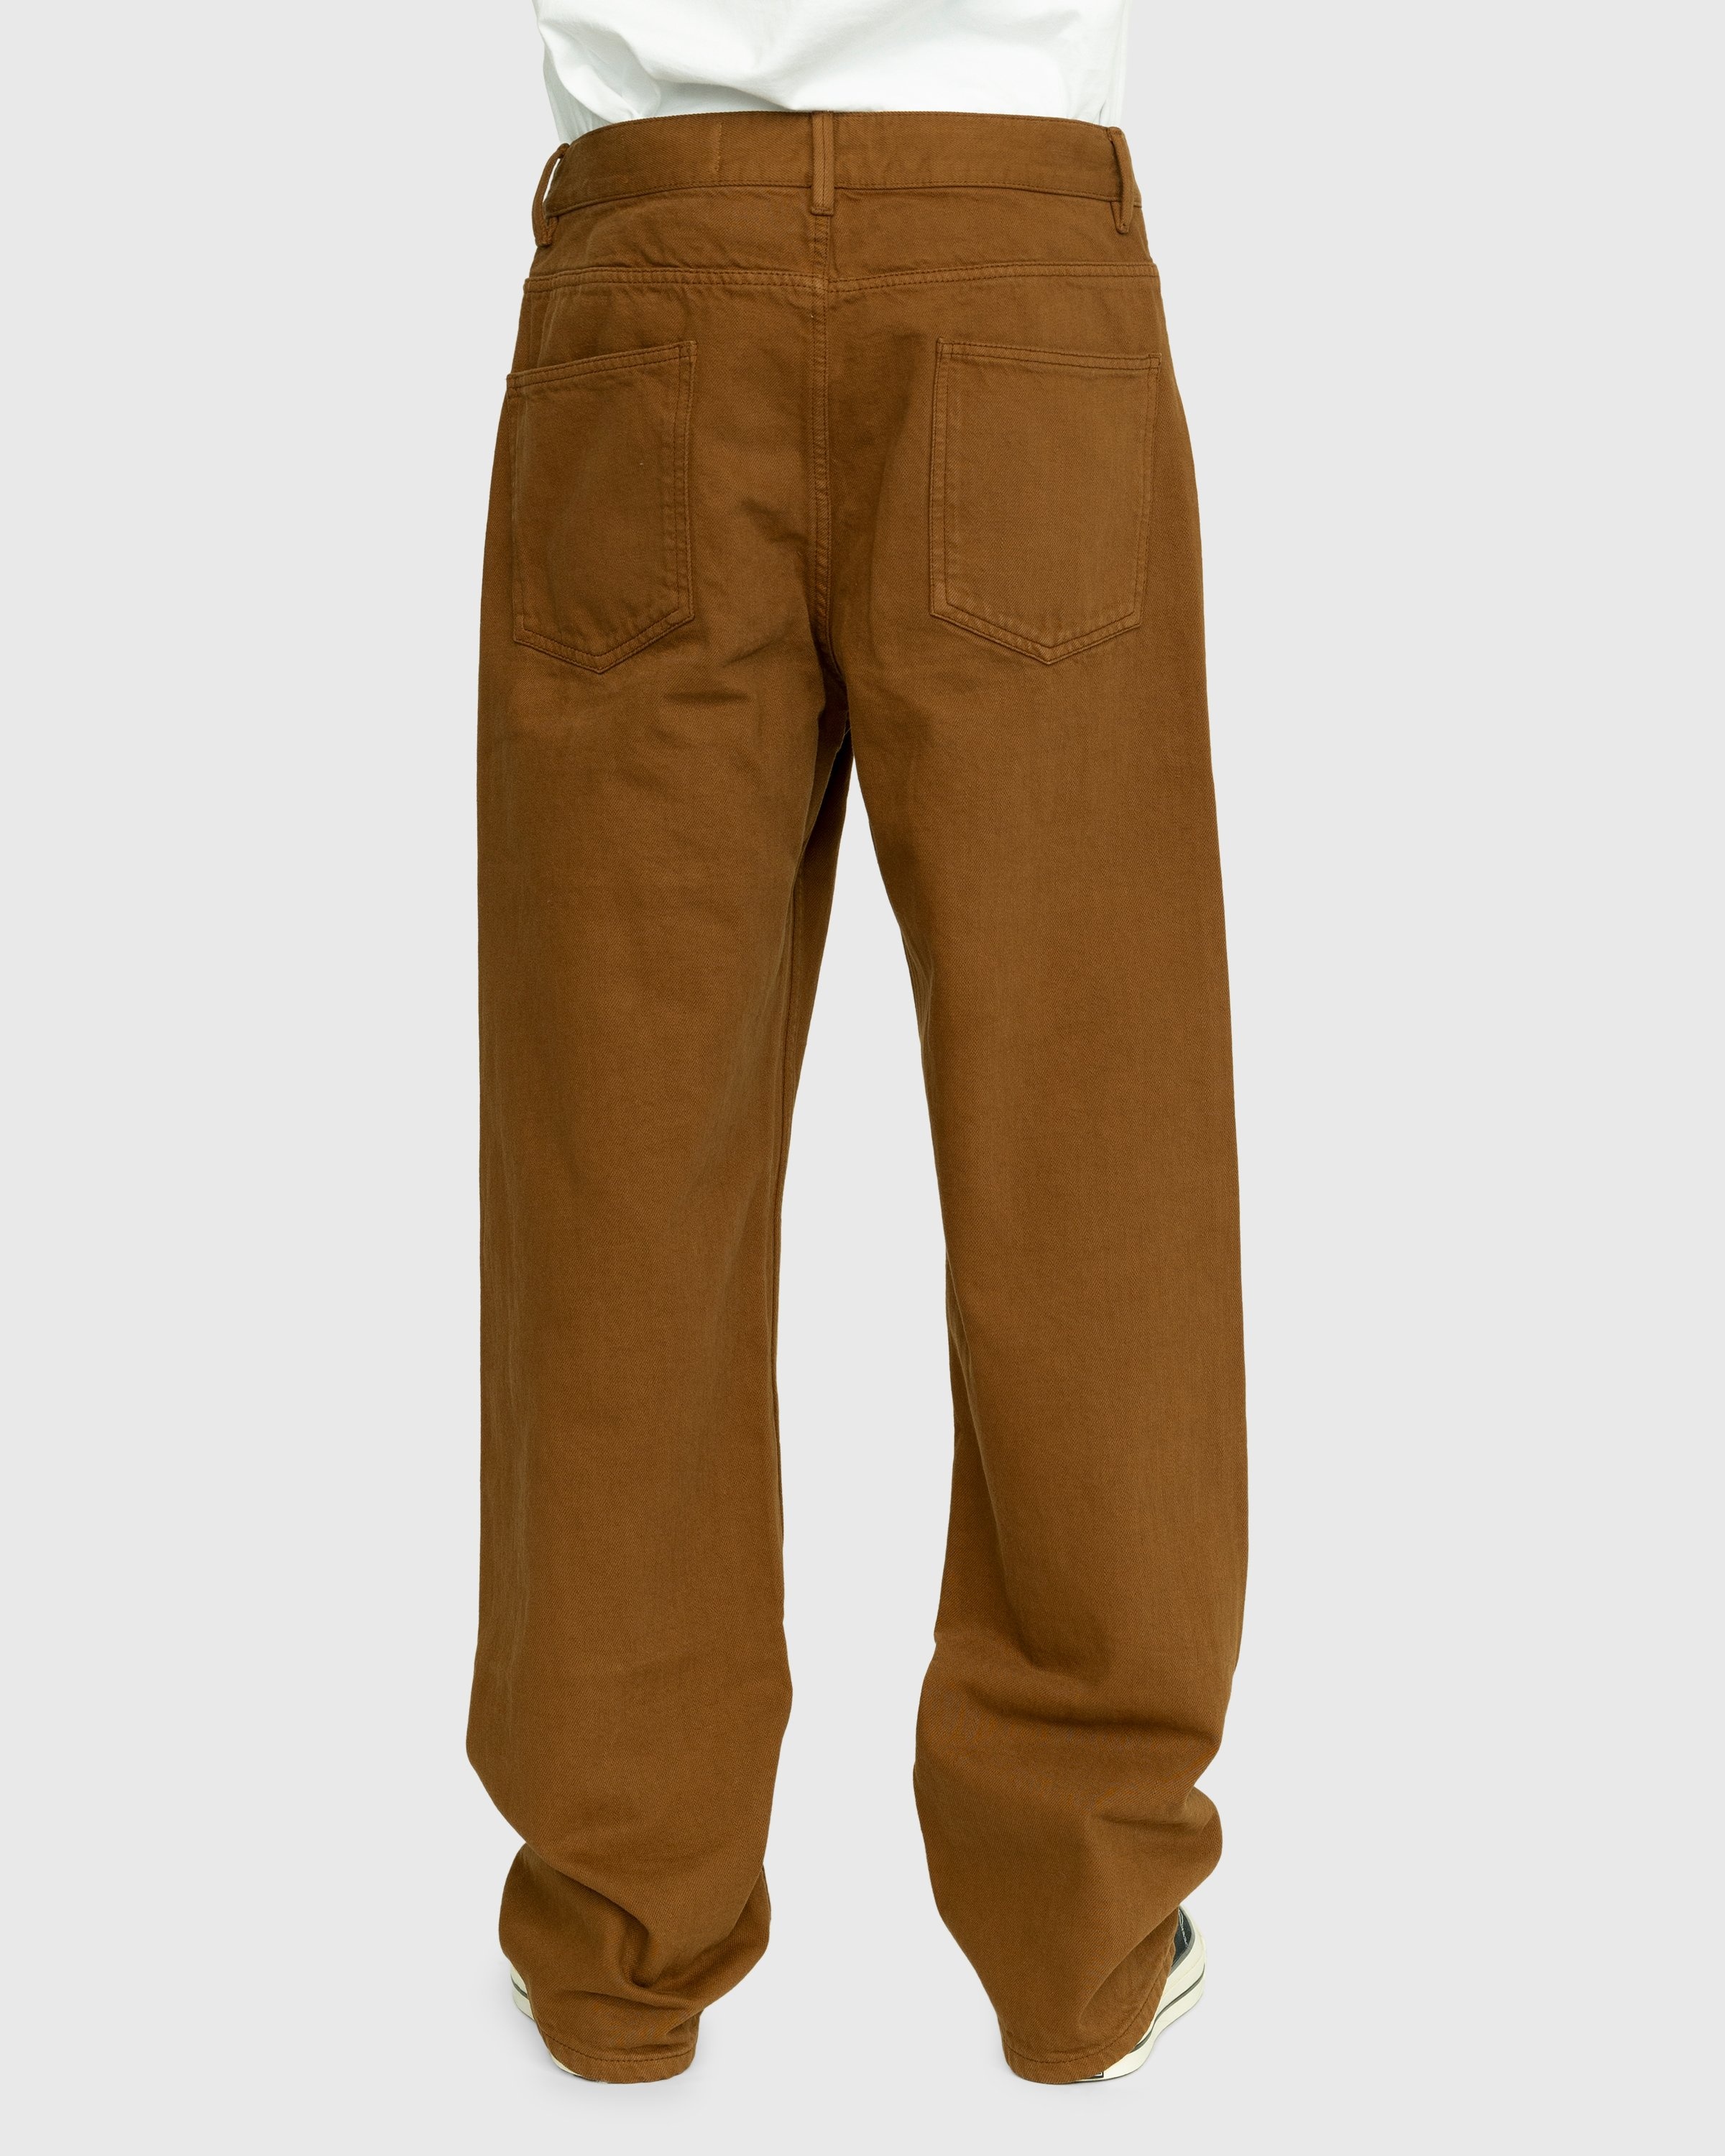 Lemaire – Seamless Jeans Brown - Pants - Brown - Image 4